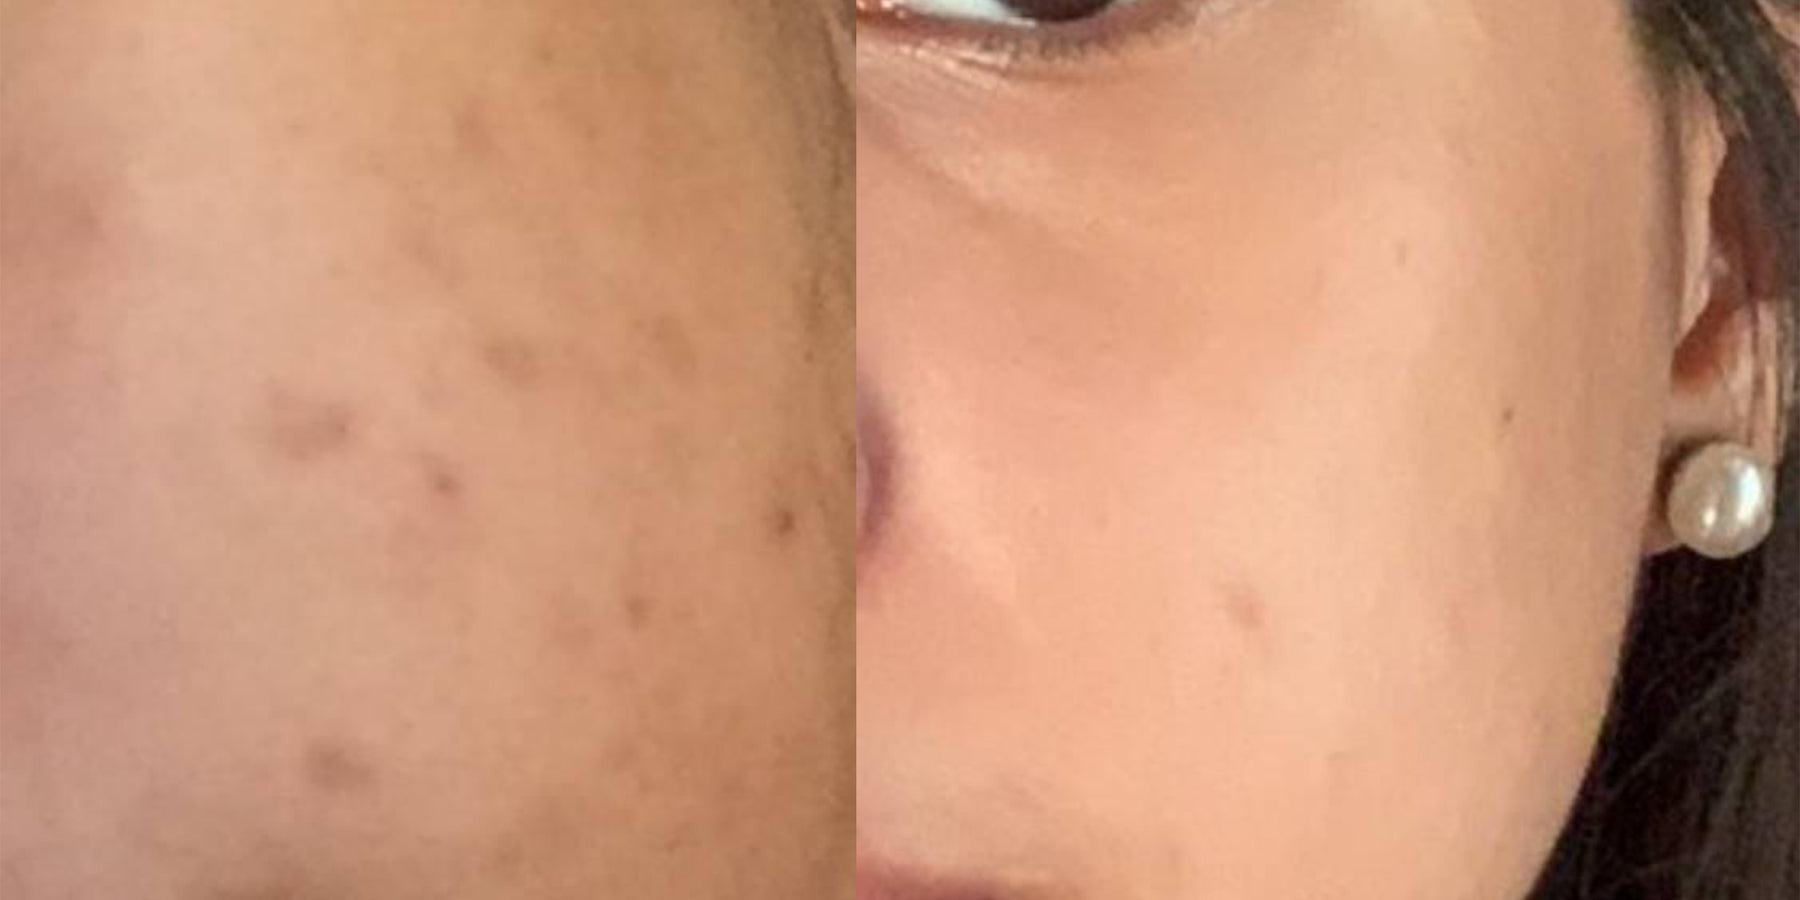 Before & After: Post Acne Marks